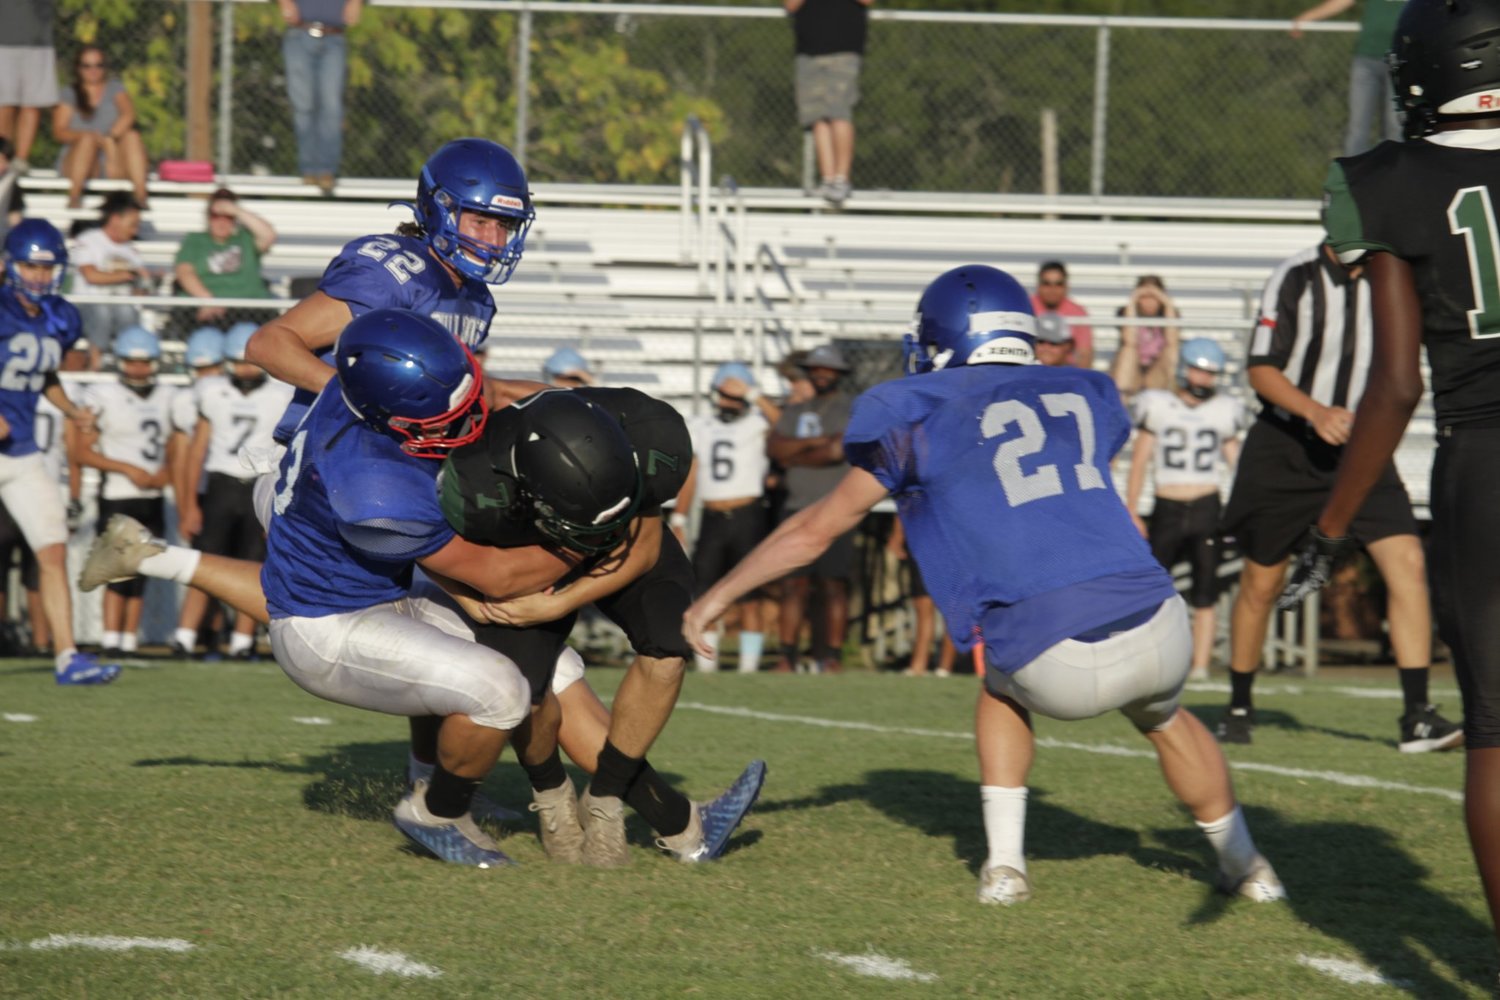 Quitman defenders take down a Quinlan Boles runner in last Friday’s scrimmage.